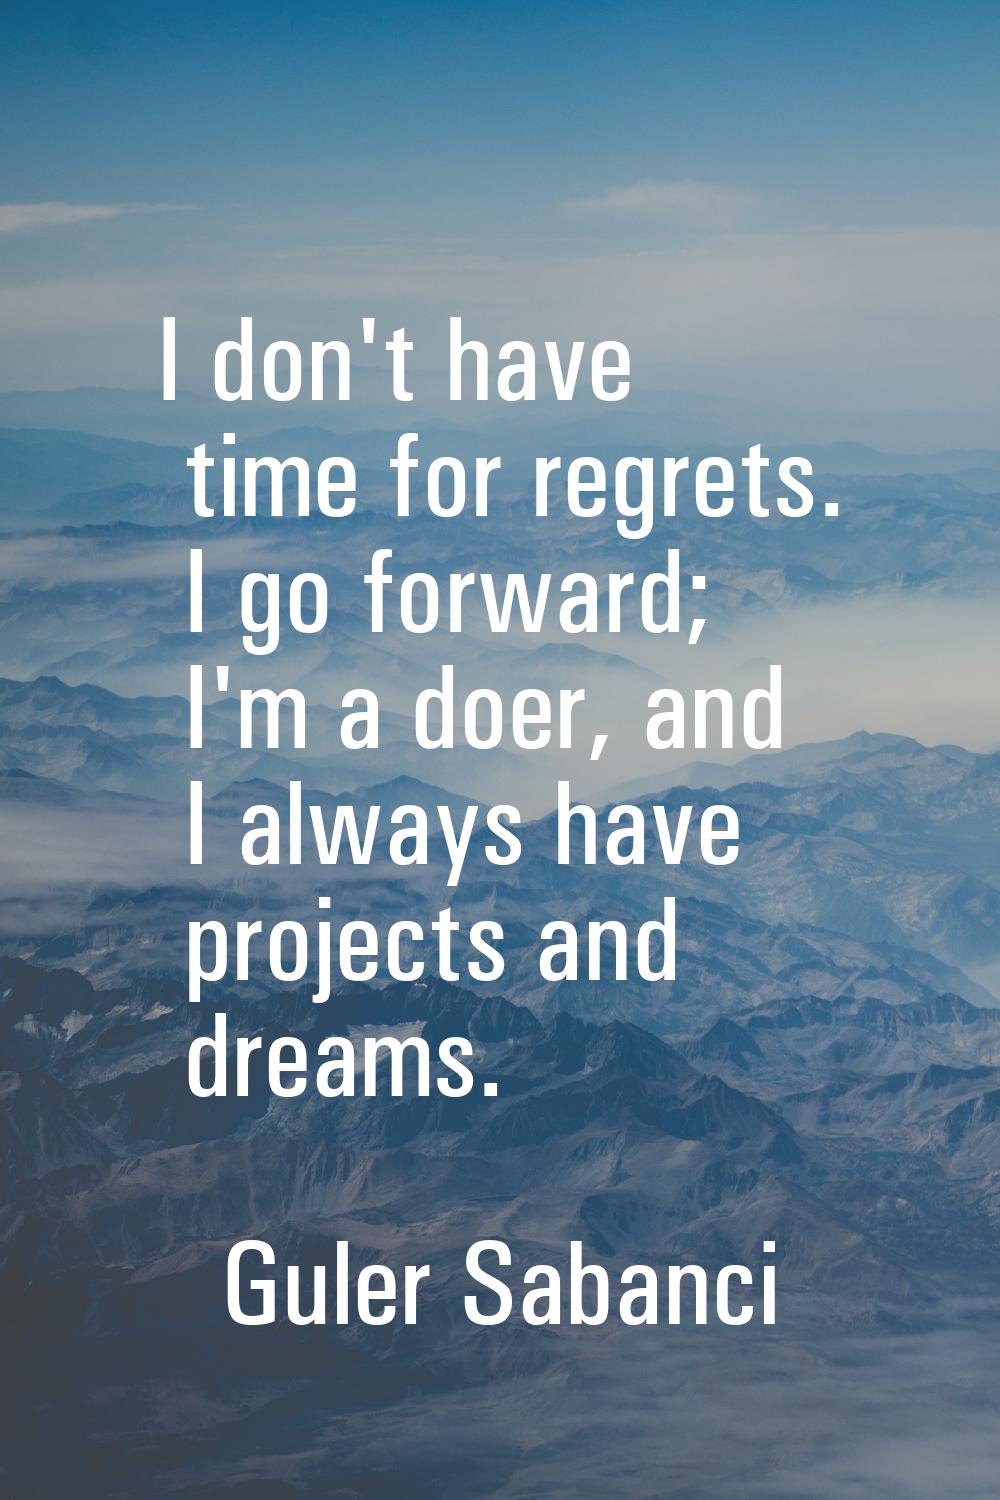 I don't have time for regrets. I go forward; I'm a doer, and I always have projects and dreams.